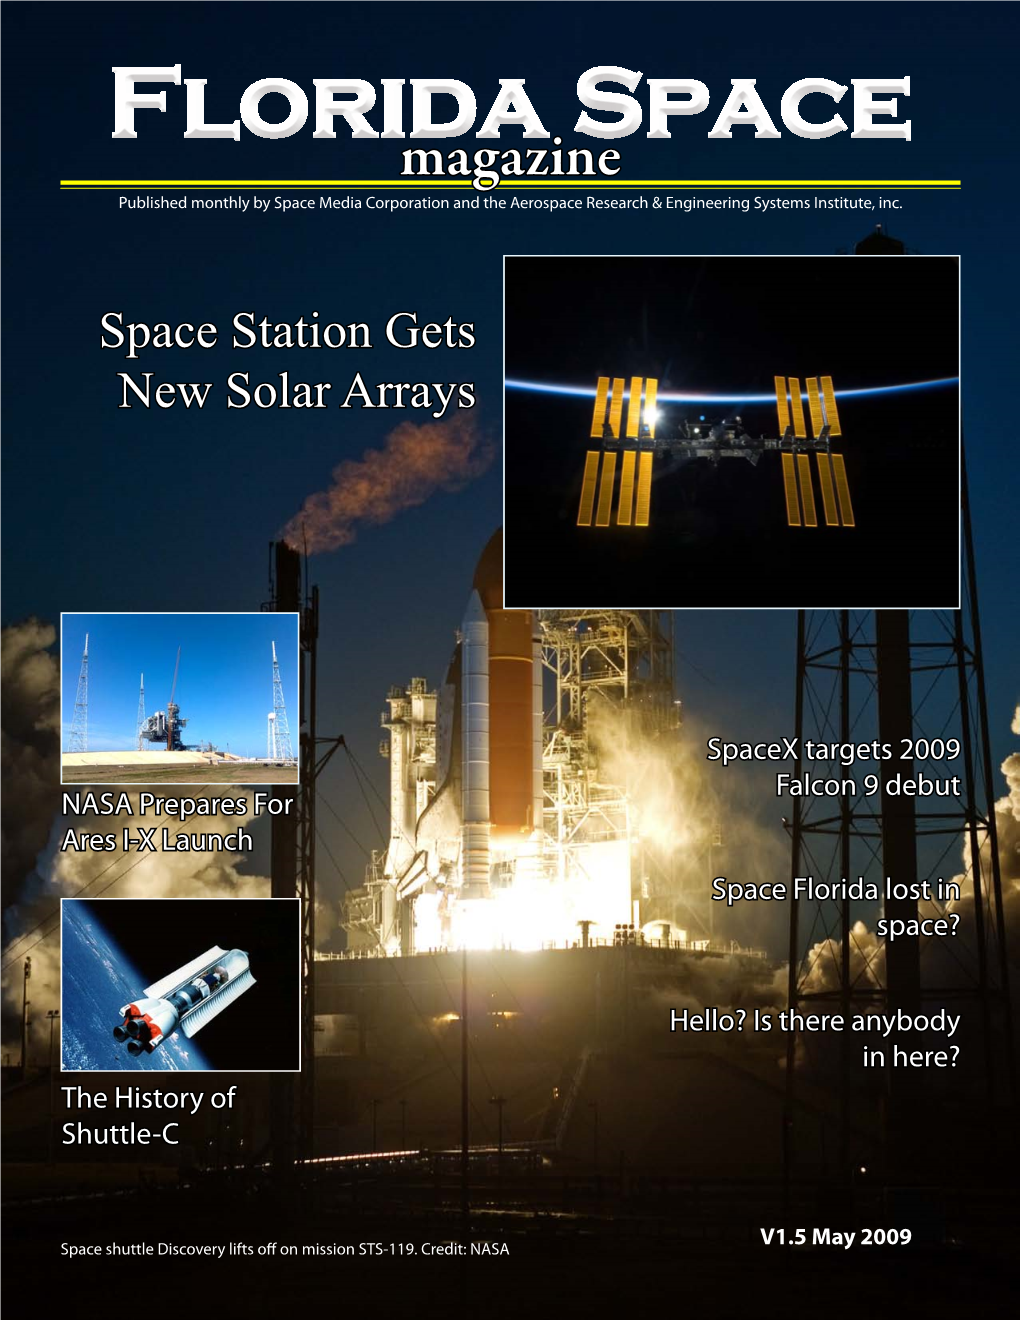 Florida Space Magazine Published Monthly by Space Media Corporation and the Aerospace Research & Engineering Systems Institute, Inc